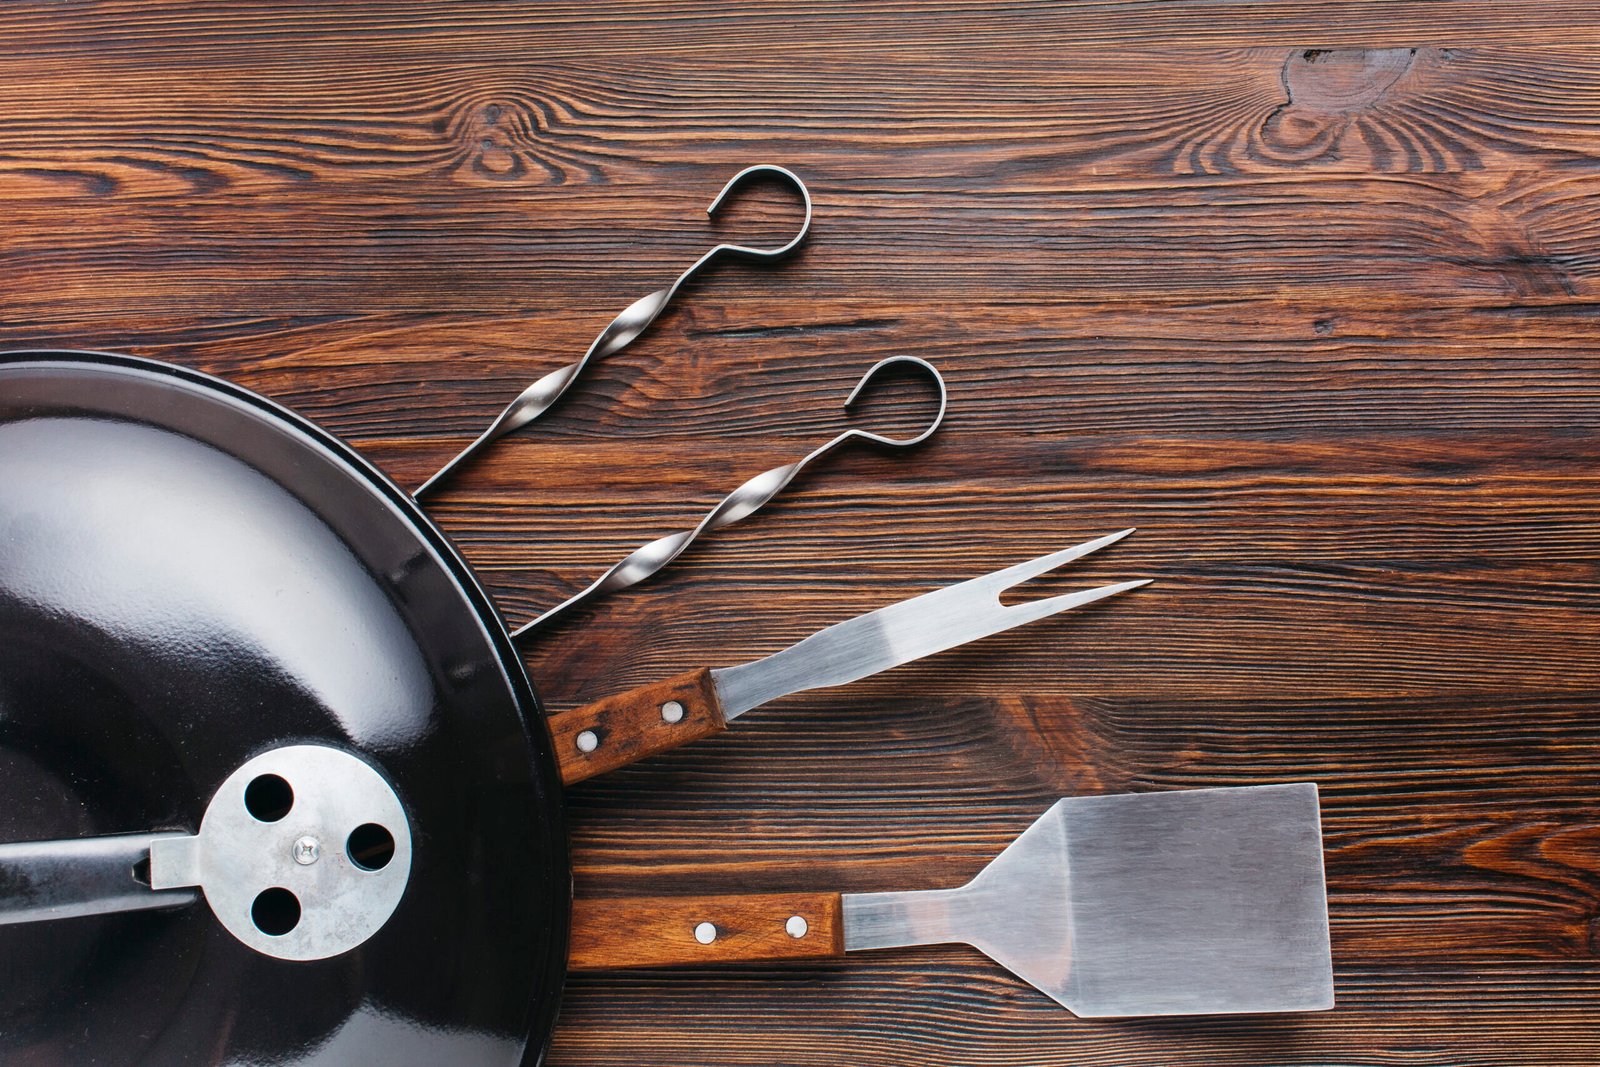 The Best Cooking Accessories You Need For BBQ Grilling